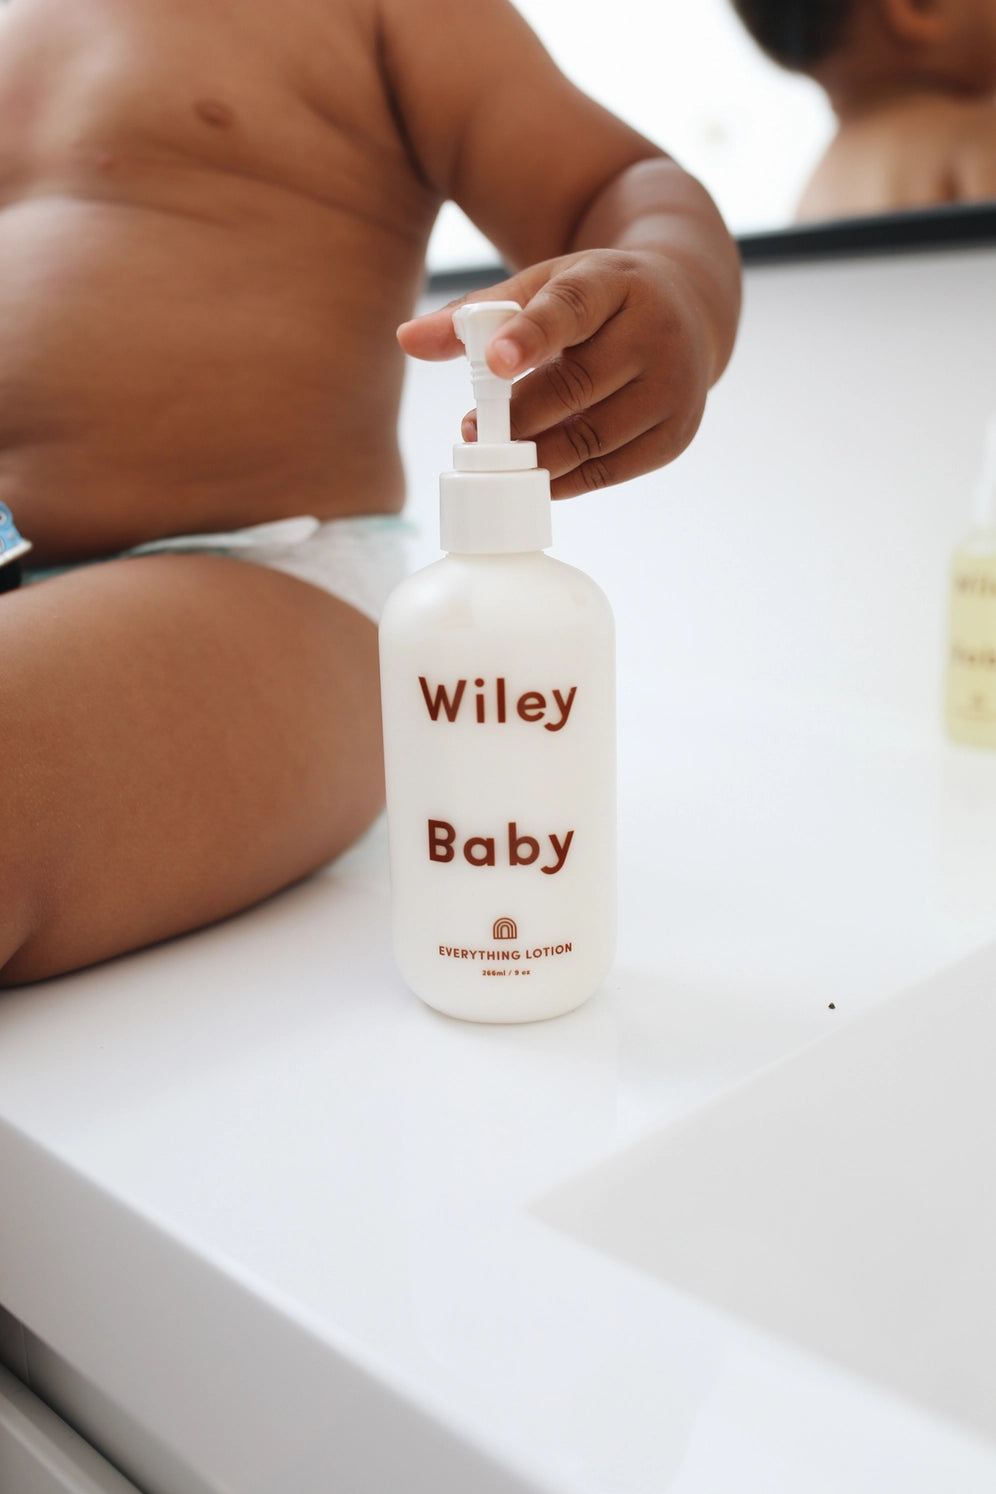 Wiley Baby Everything Lotion